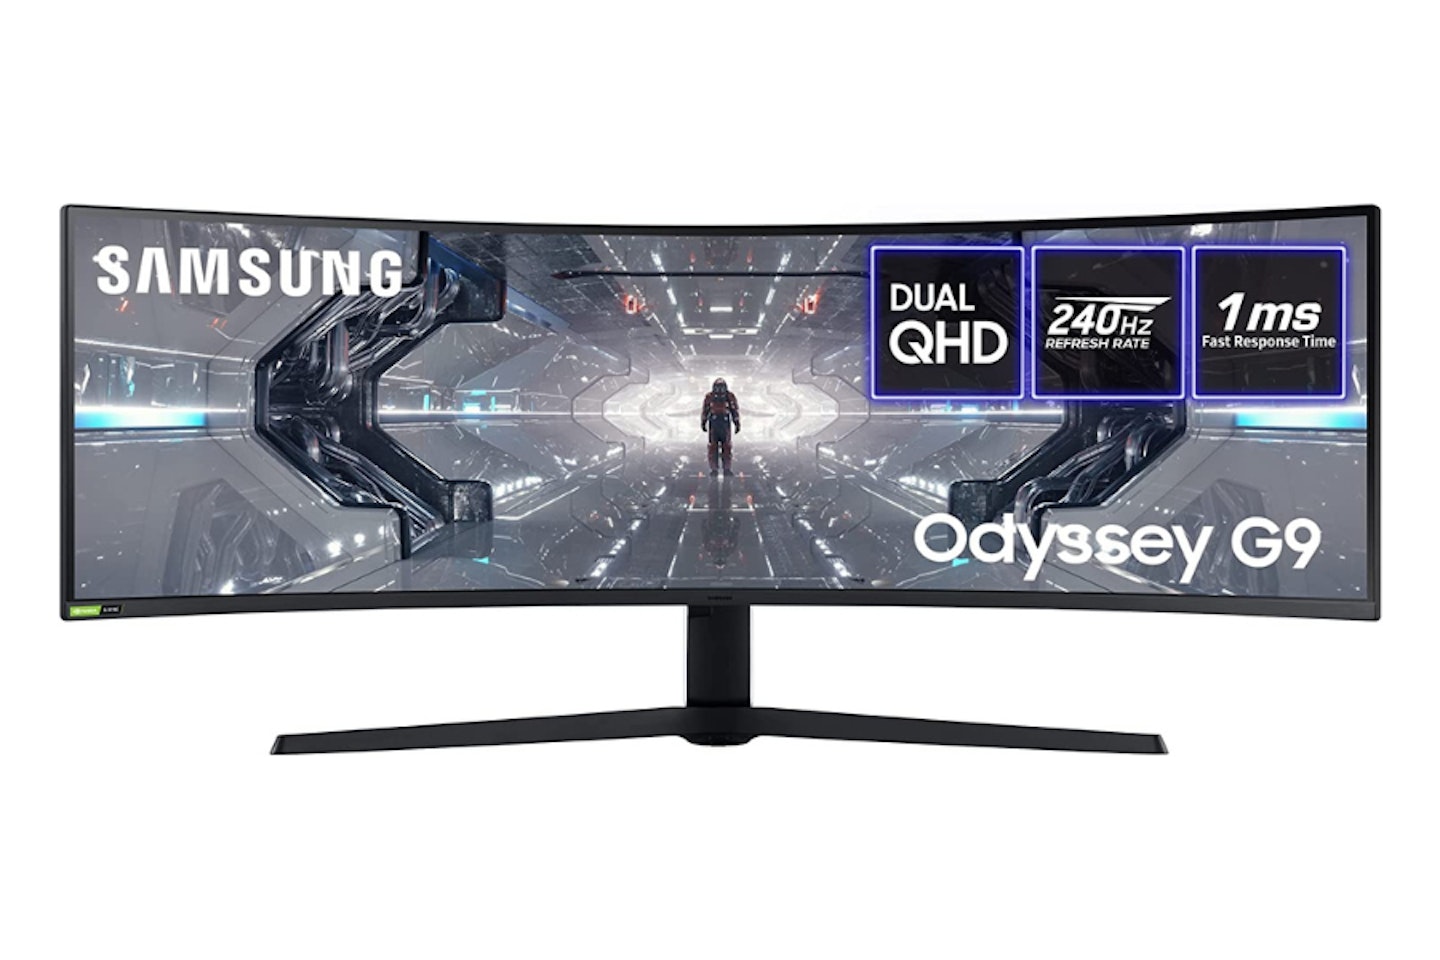 Samsung Odyssey Gaming Monitor LC49G95 - possibly the best ultrawide curved monitor